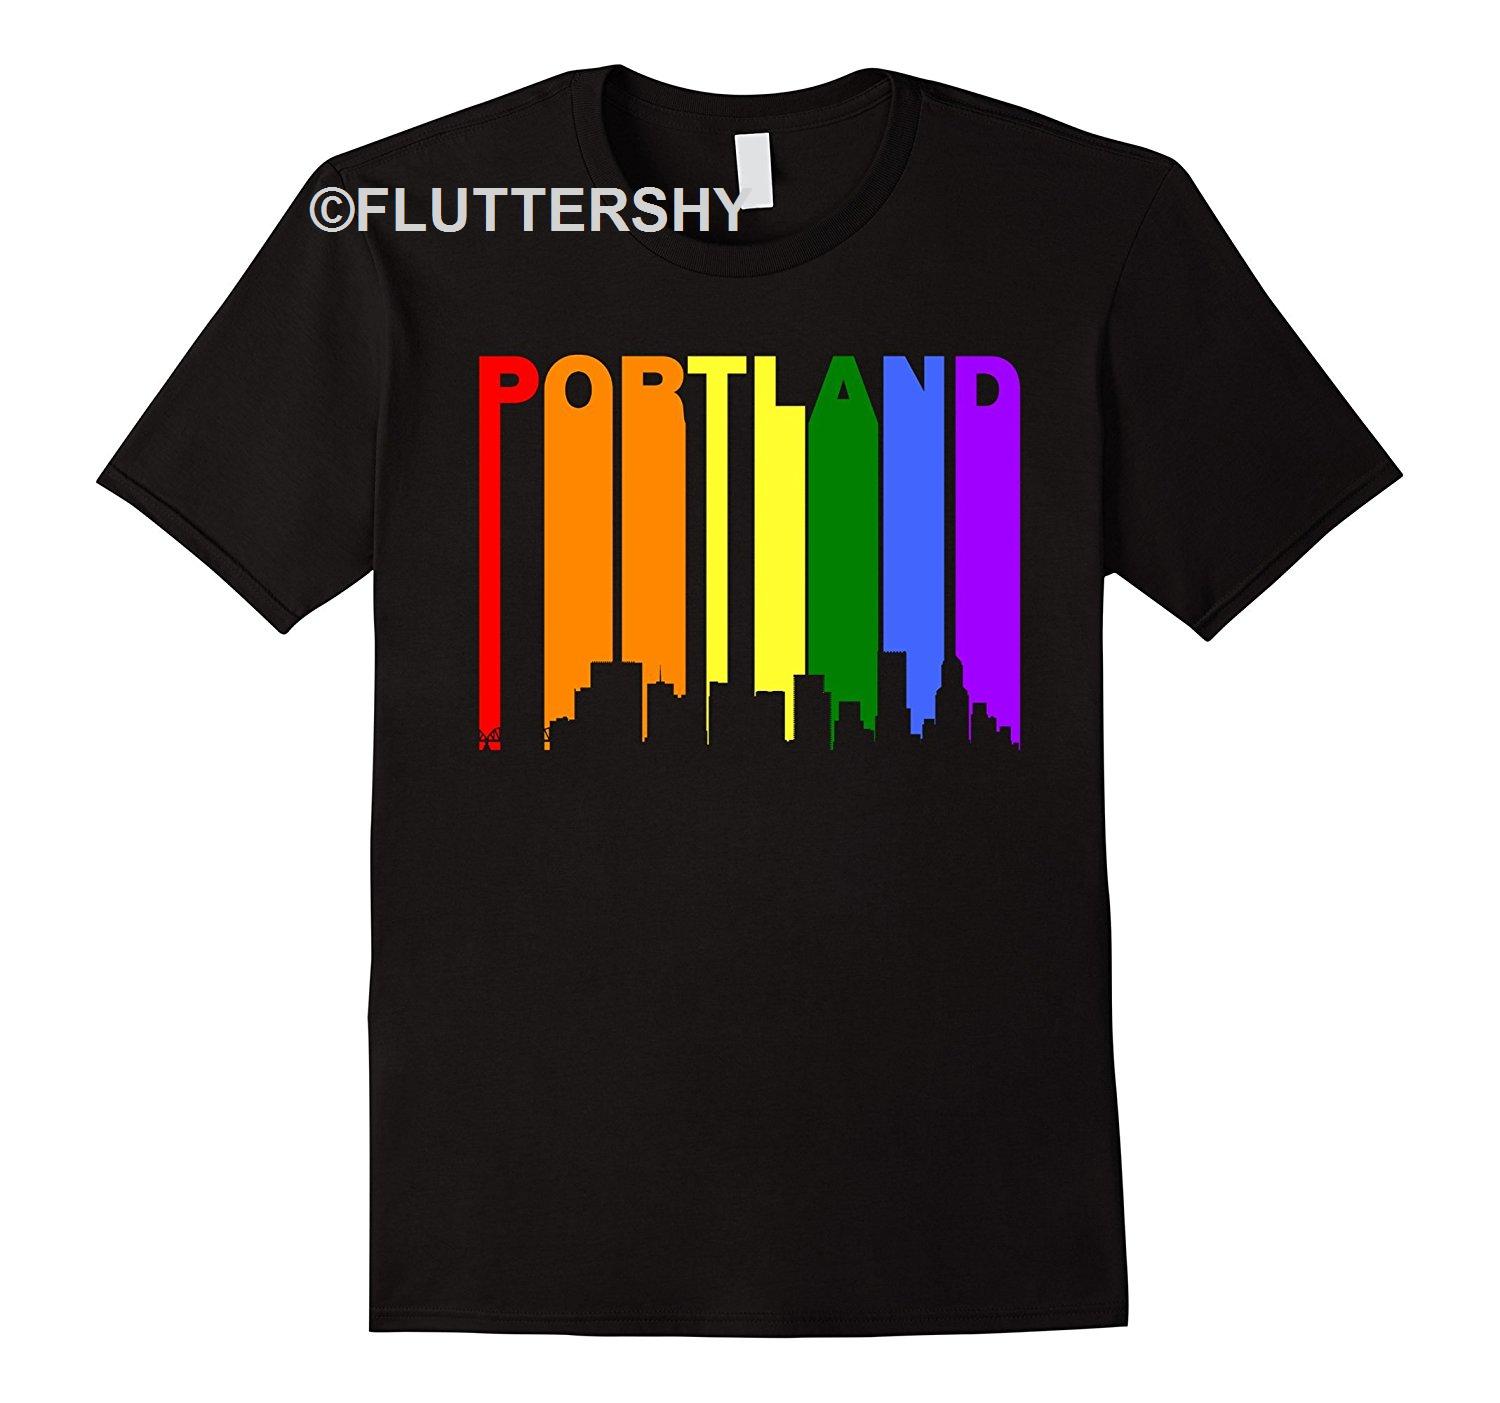 Stupendous Check Out This Awesome Portland Oregon Downtown Rainbow Lgbt Gay Pride T Shirt